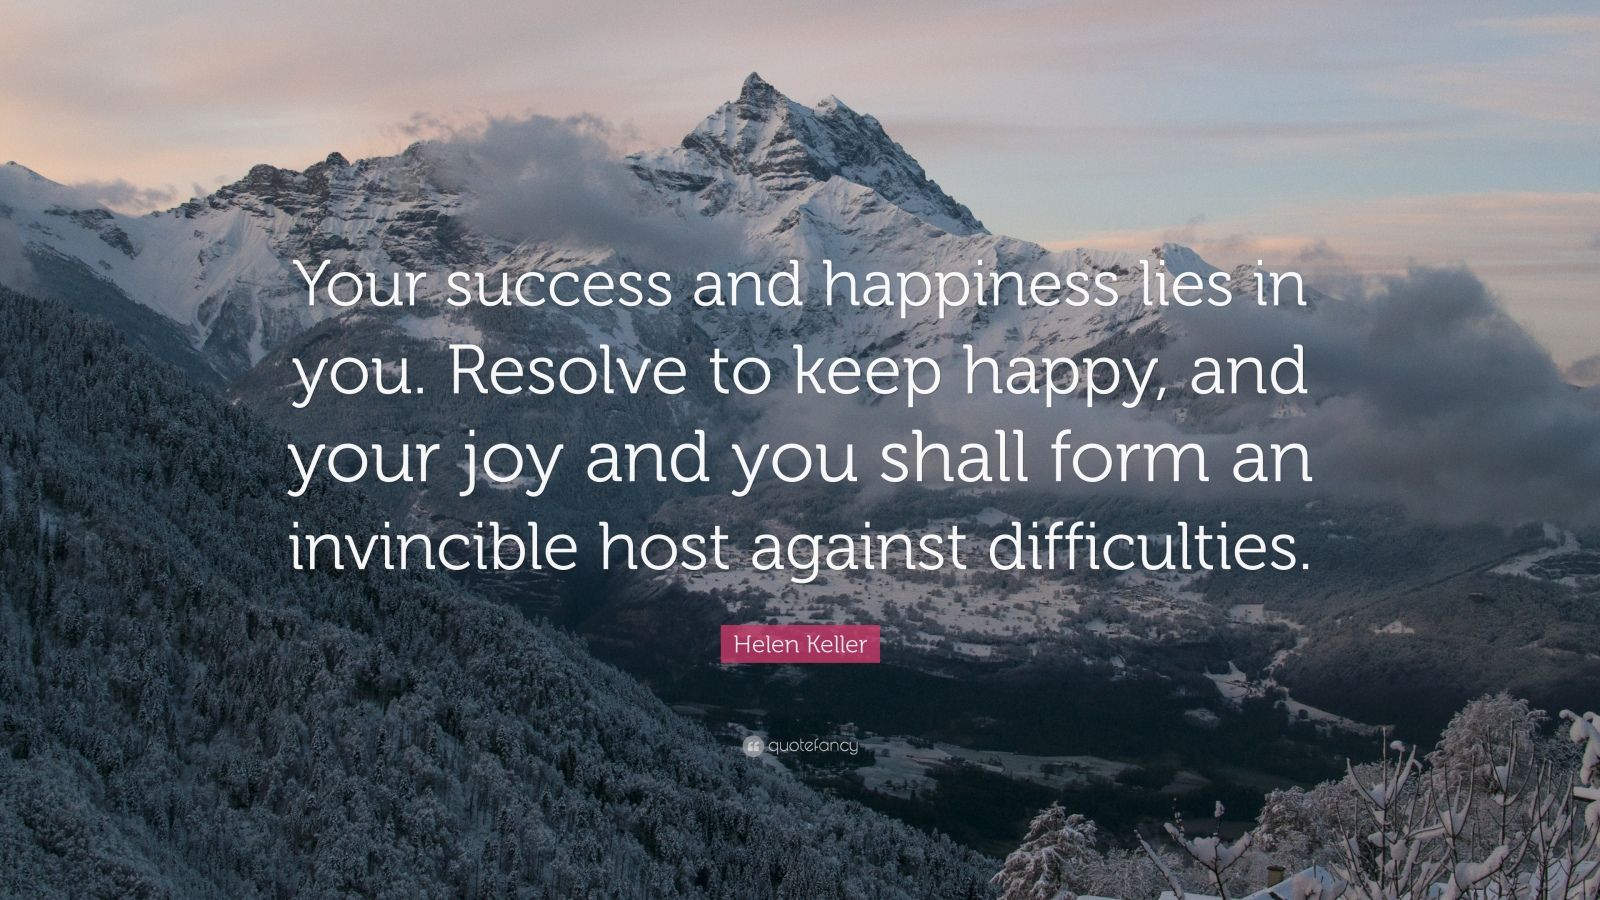 Helen Keller Quote Your Success And Happiness Lies In You Resolve To Keep Happy And Your Joy